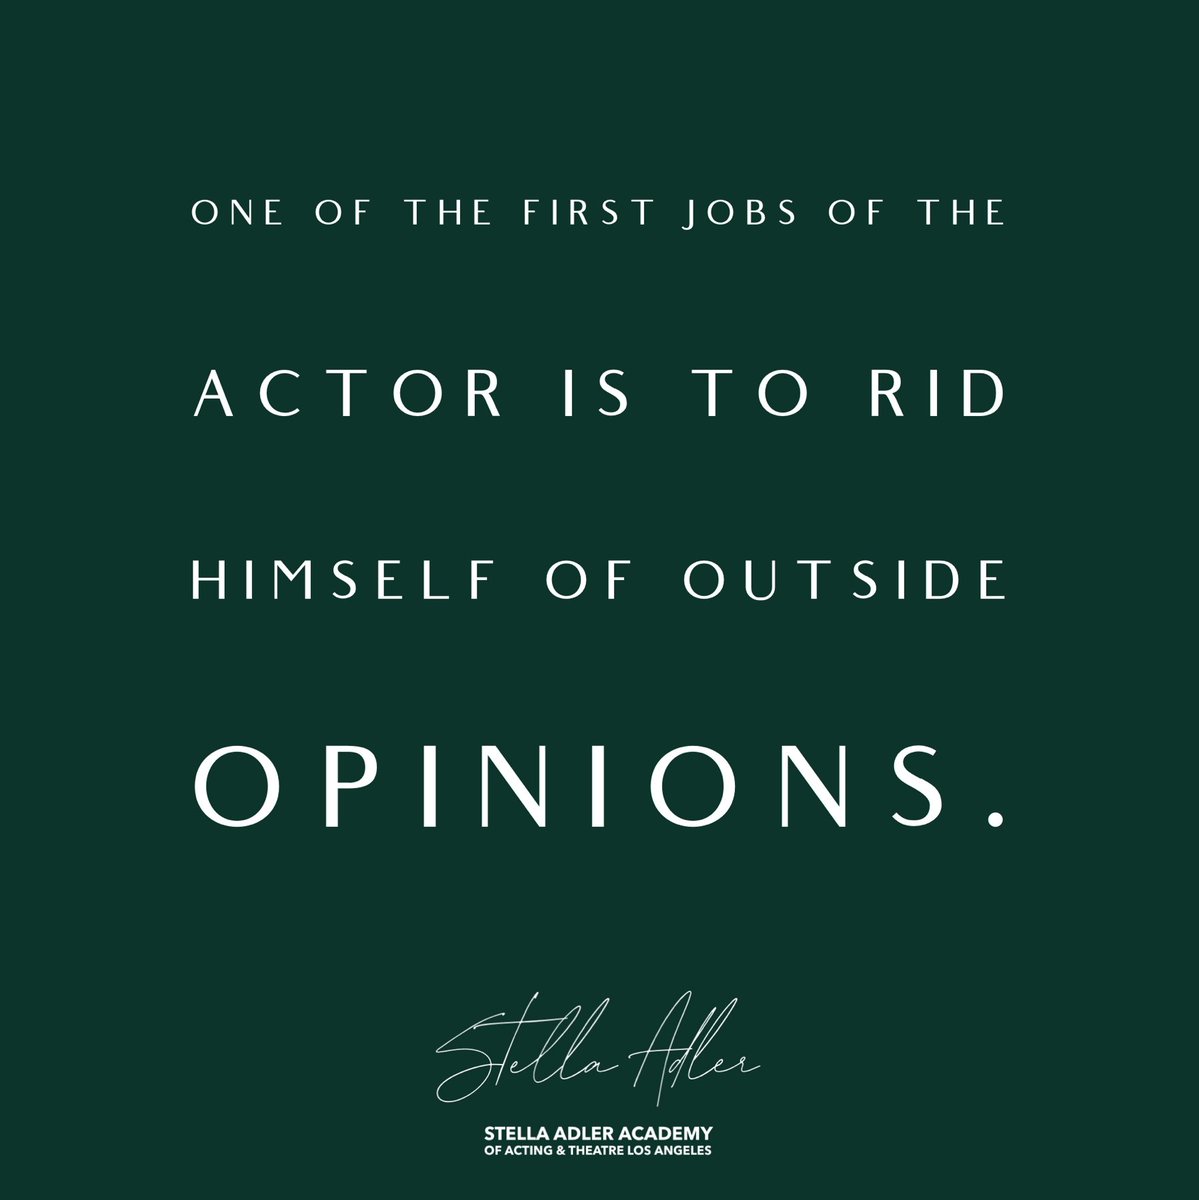 Stella Adler Academy On Twitter Confidence Is Key Quote Inspo Acting Stellaadler Actingquote Actinginspo Confidence Actor